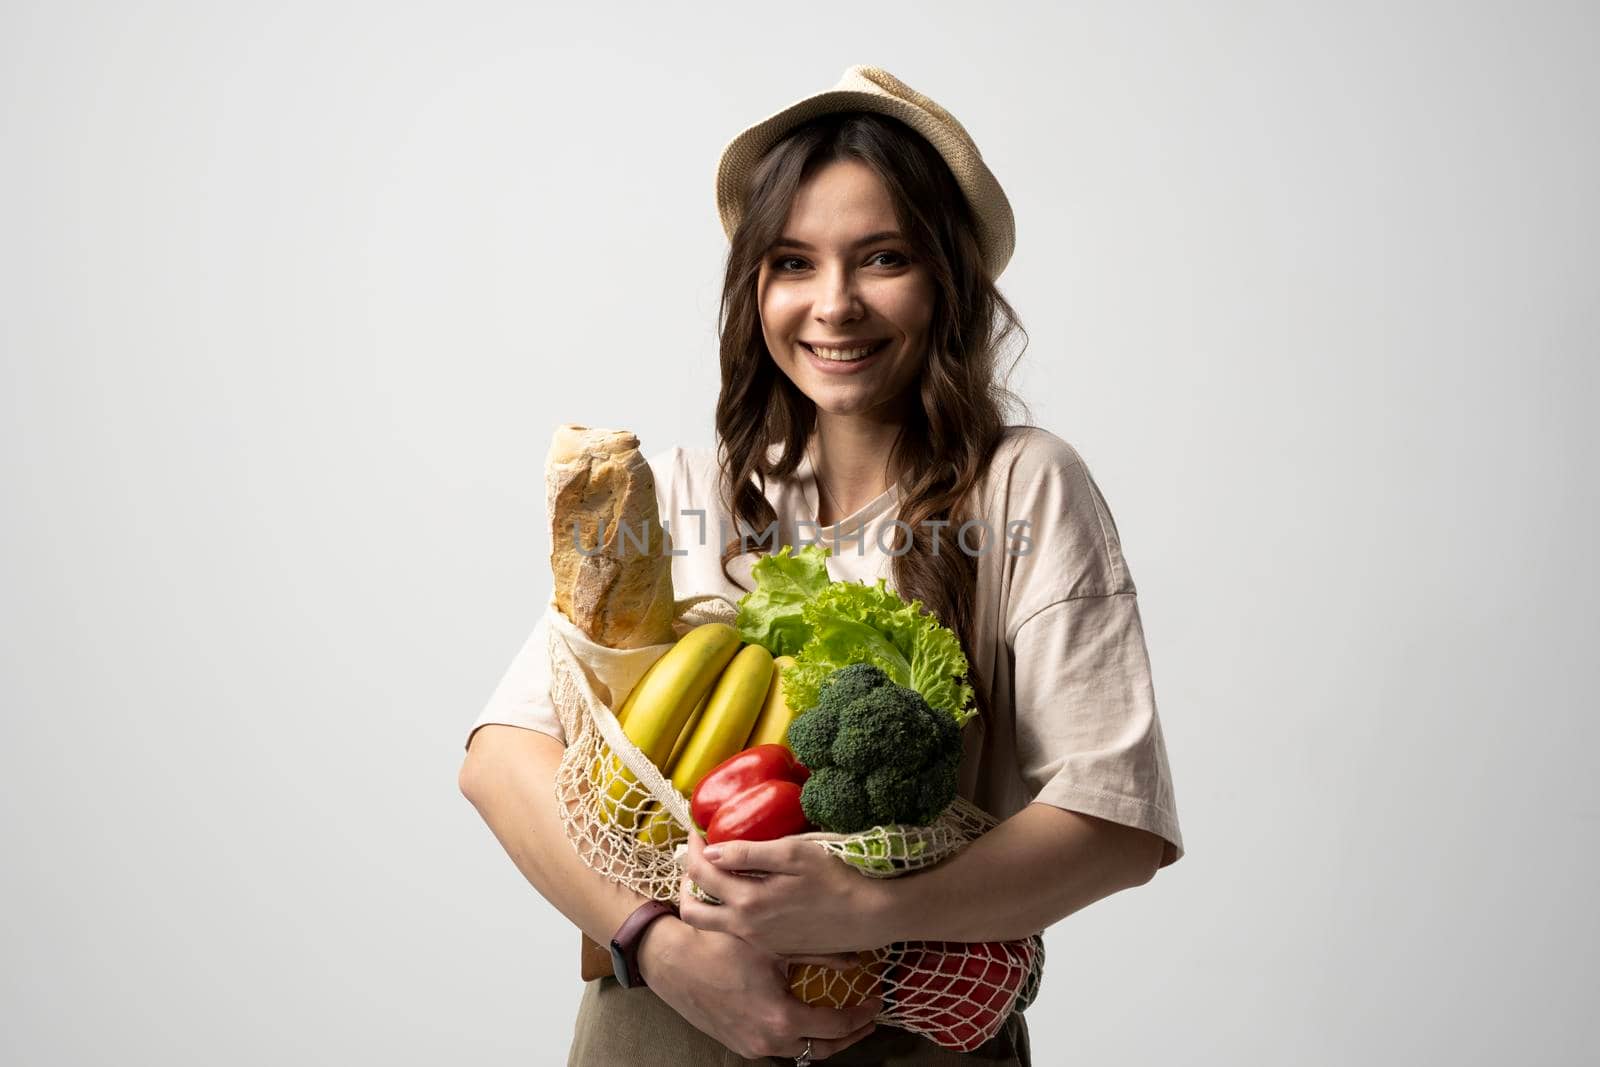 Portrait of young woman with a eco bag of vegetables, greens. Sustainable lifestyle. Eco friendly concept